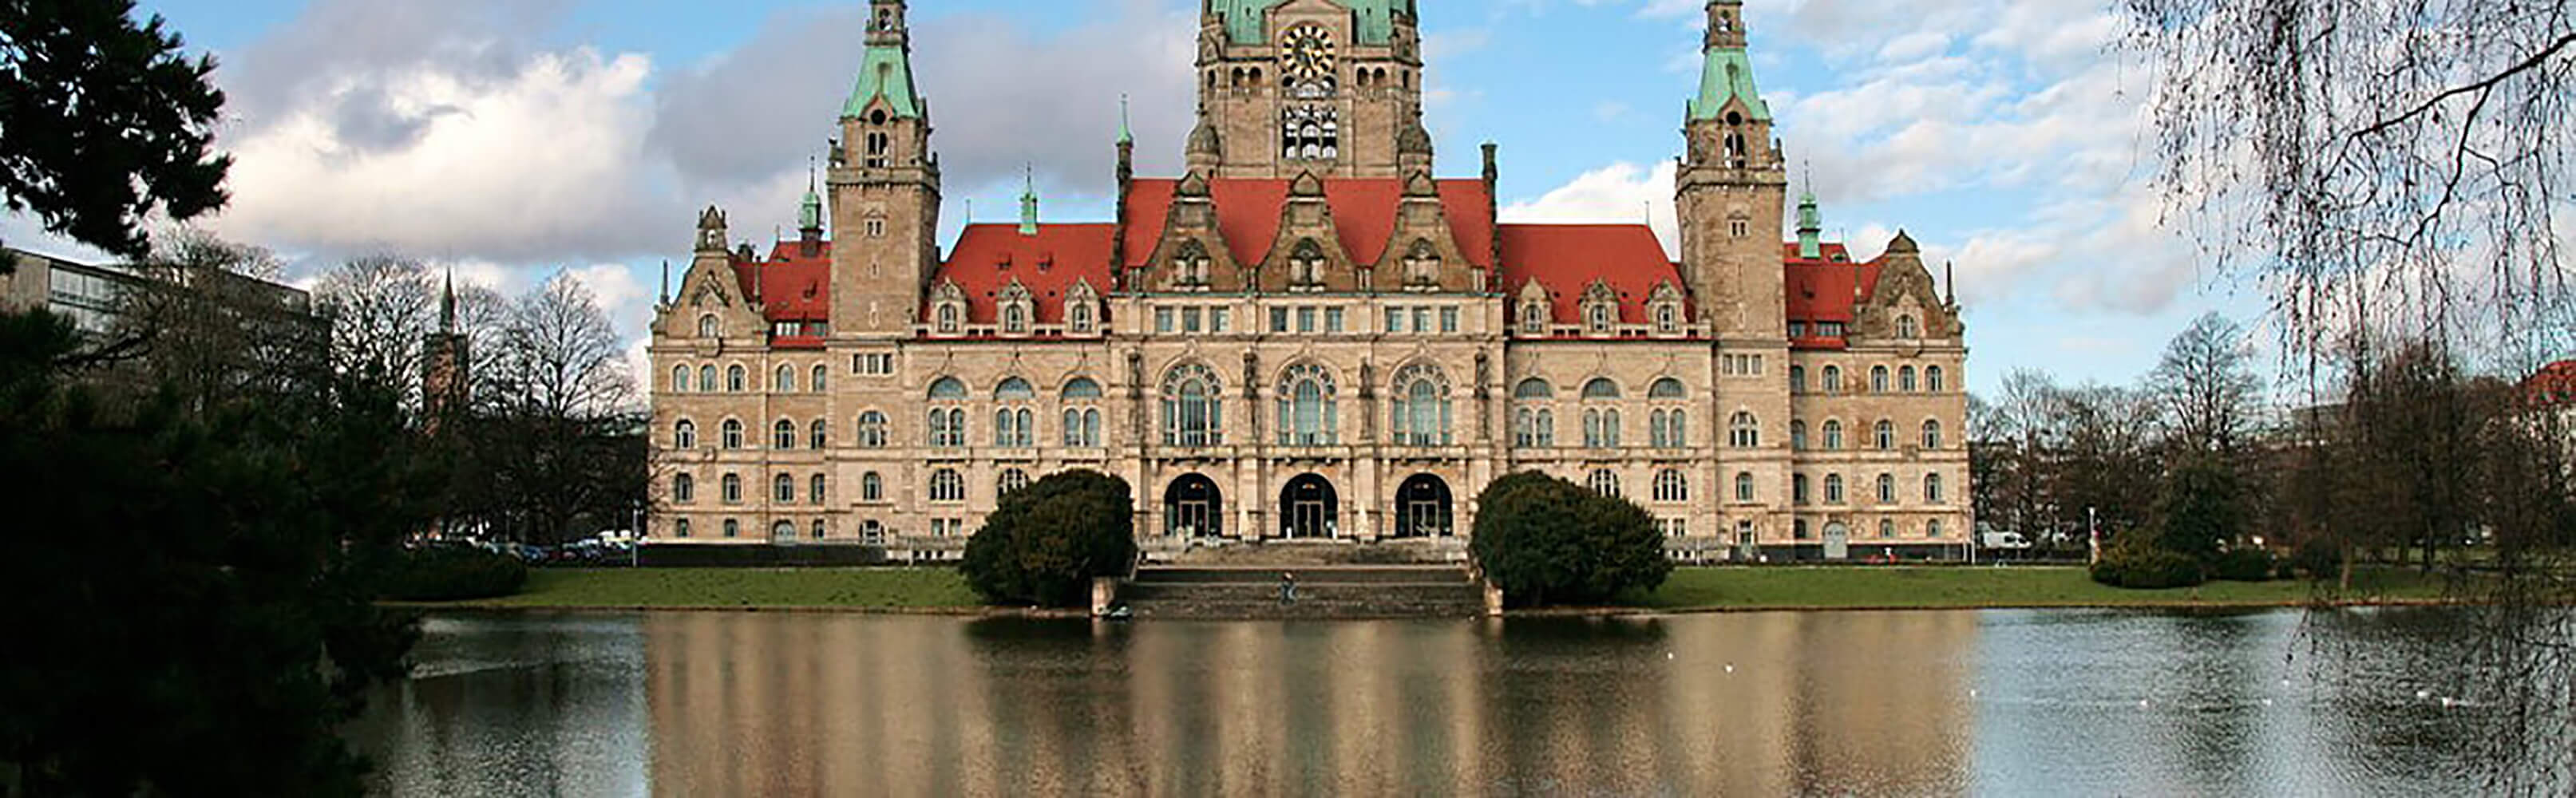 Neues Rathaus Hannover 1